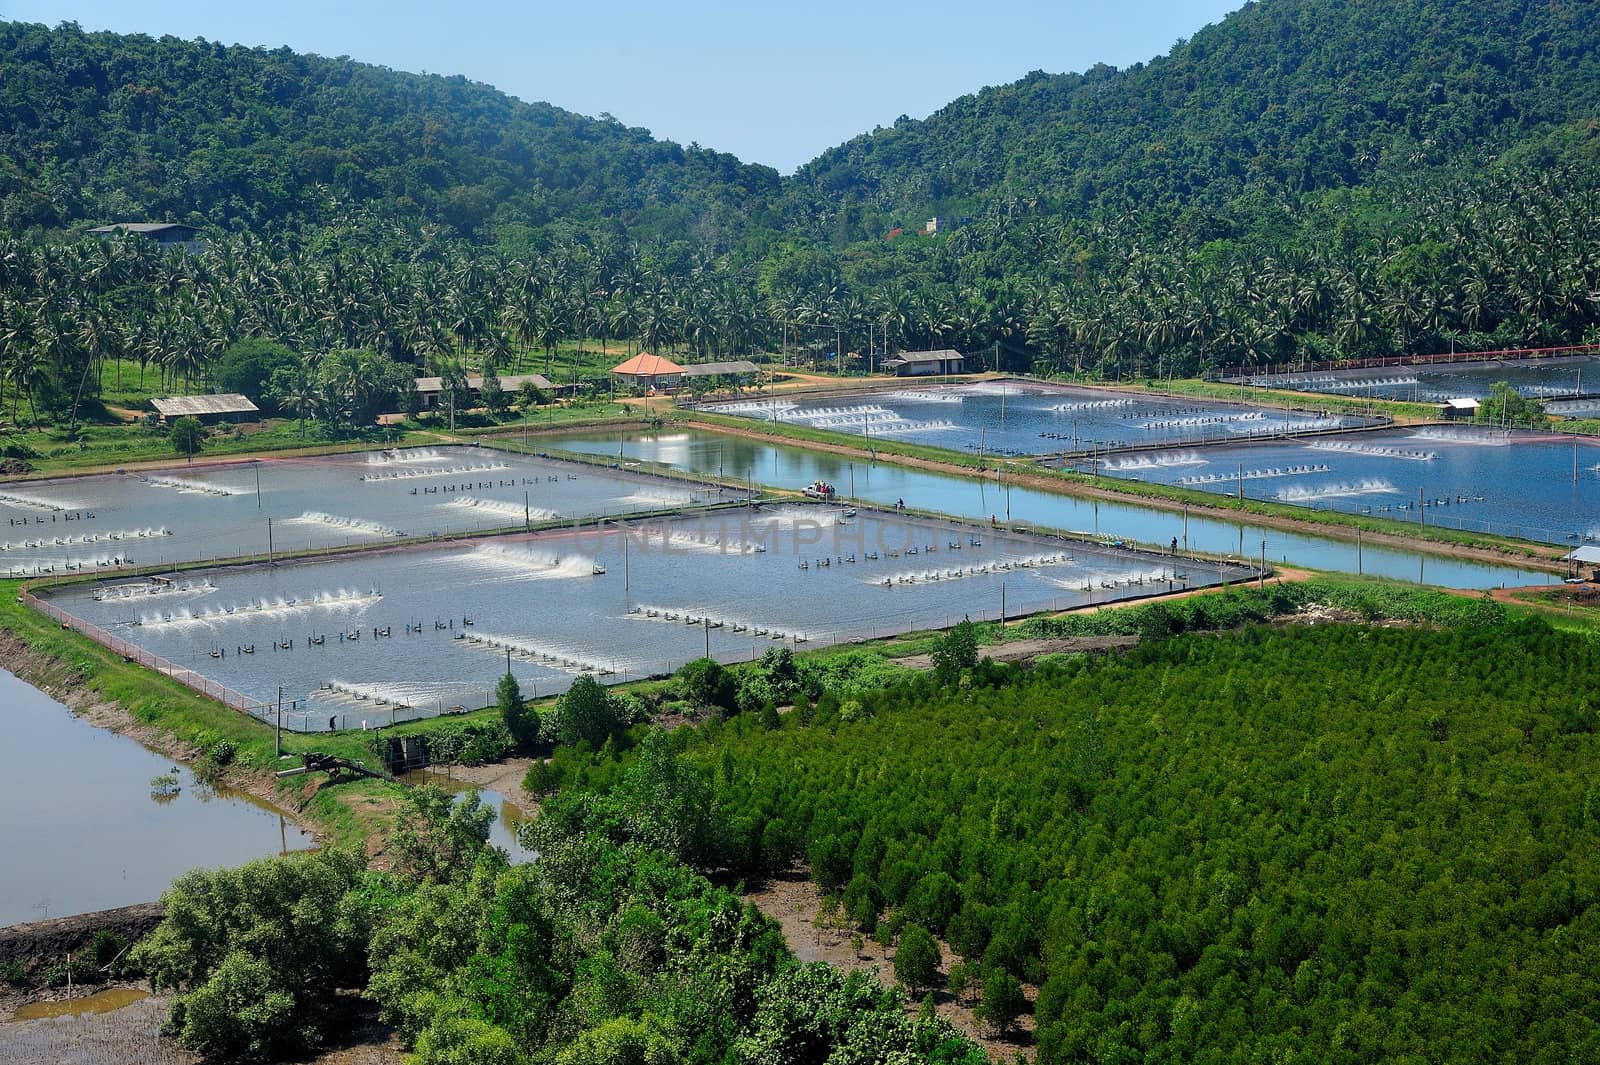 The Shrimp farming in thailand from aerial view.